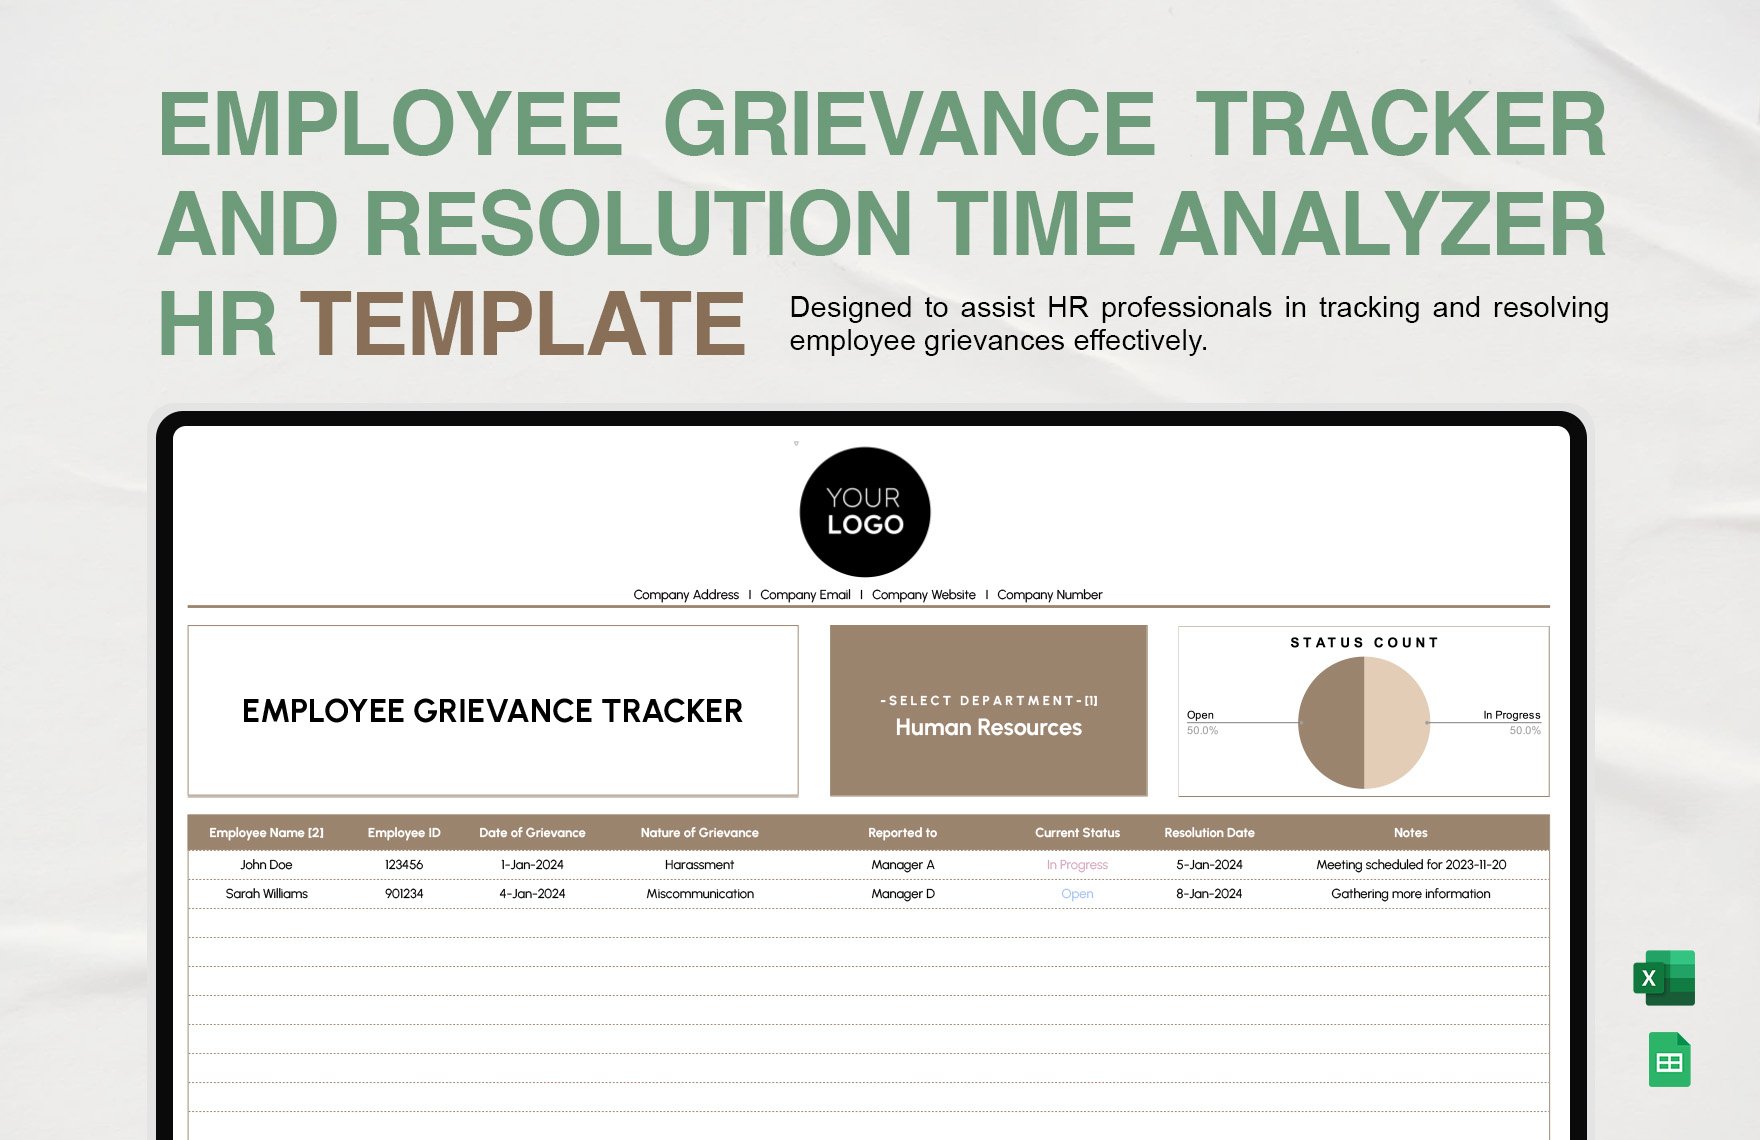 Employee Grievance Tracker and Resolution Time Analyzer HR Template